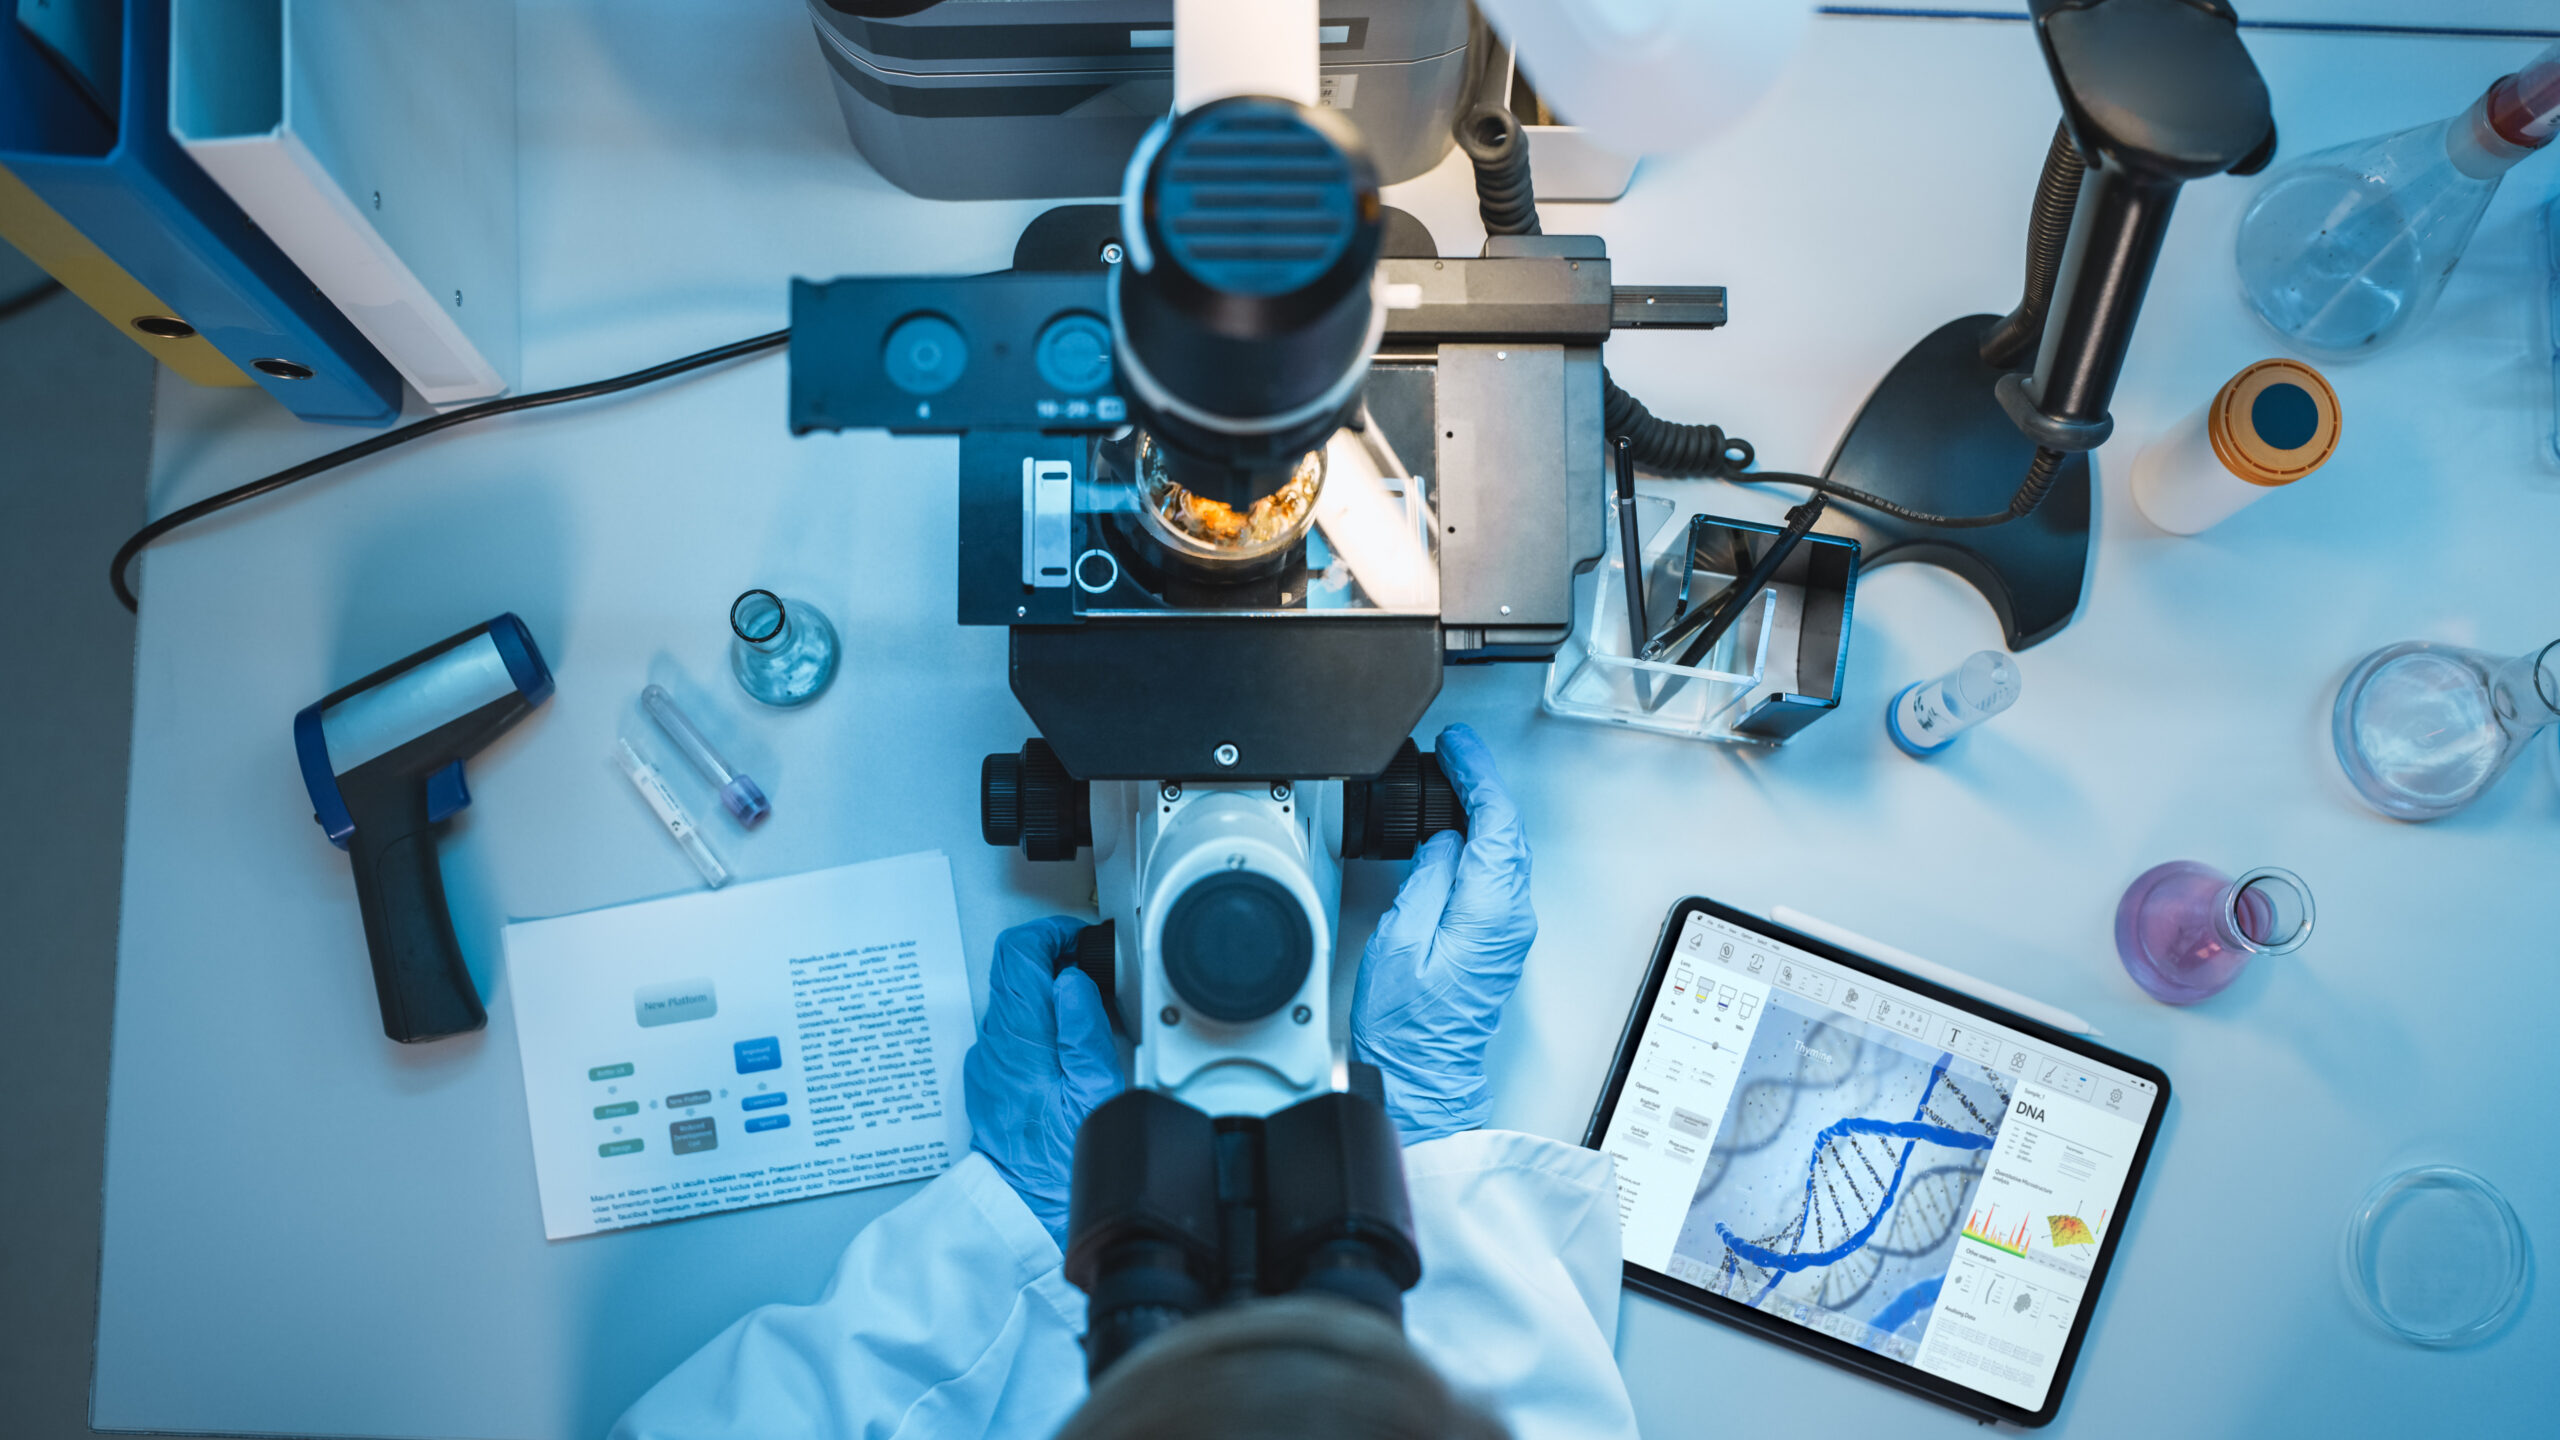 Top Down View of a Medical Research Scientist in Blue Rubber Gloves Working Behind Table in a Modern Laboratory. Doctor is Using Modern Microscop for Sample Analysis and Digital Tablet to Save Data.